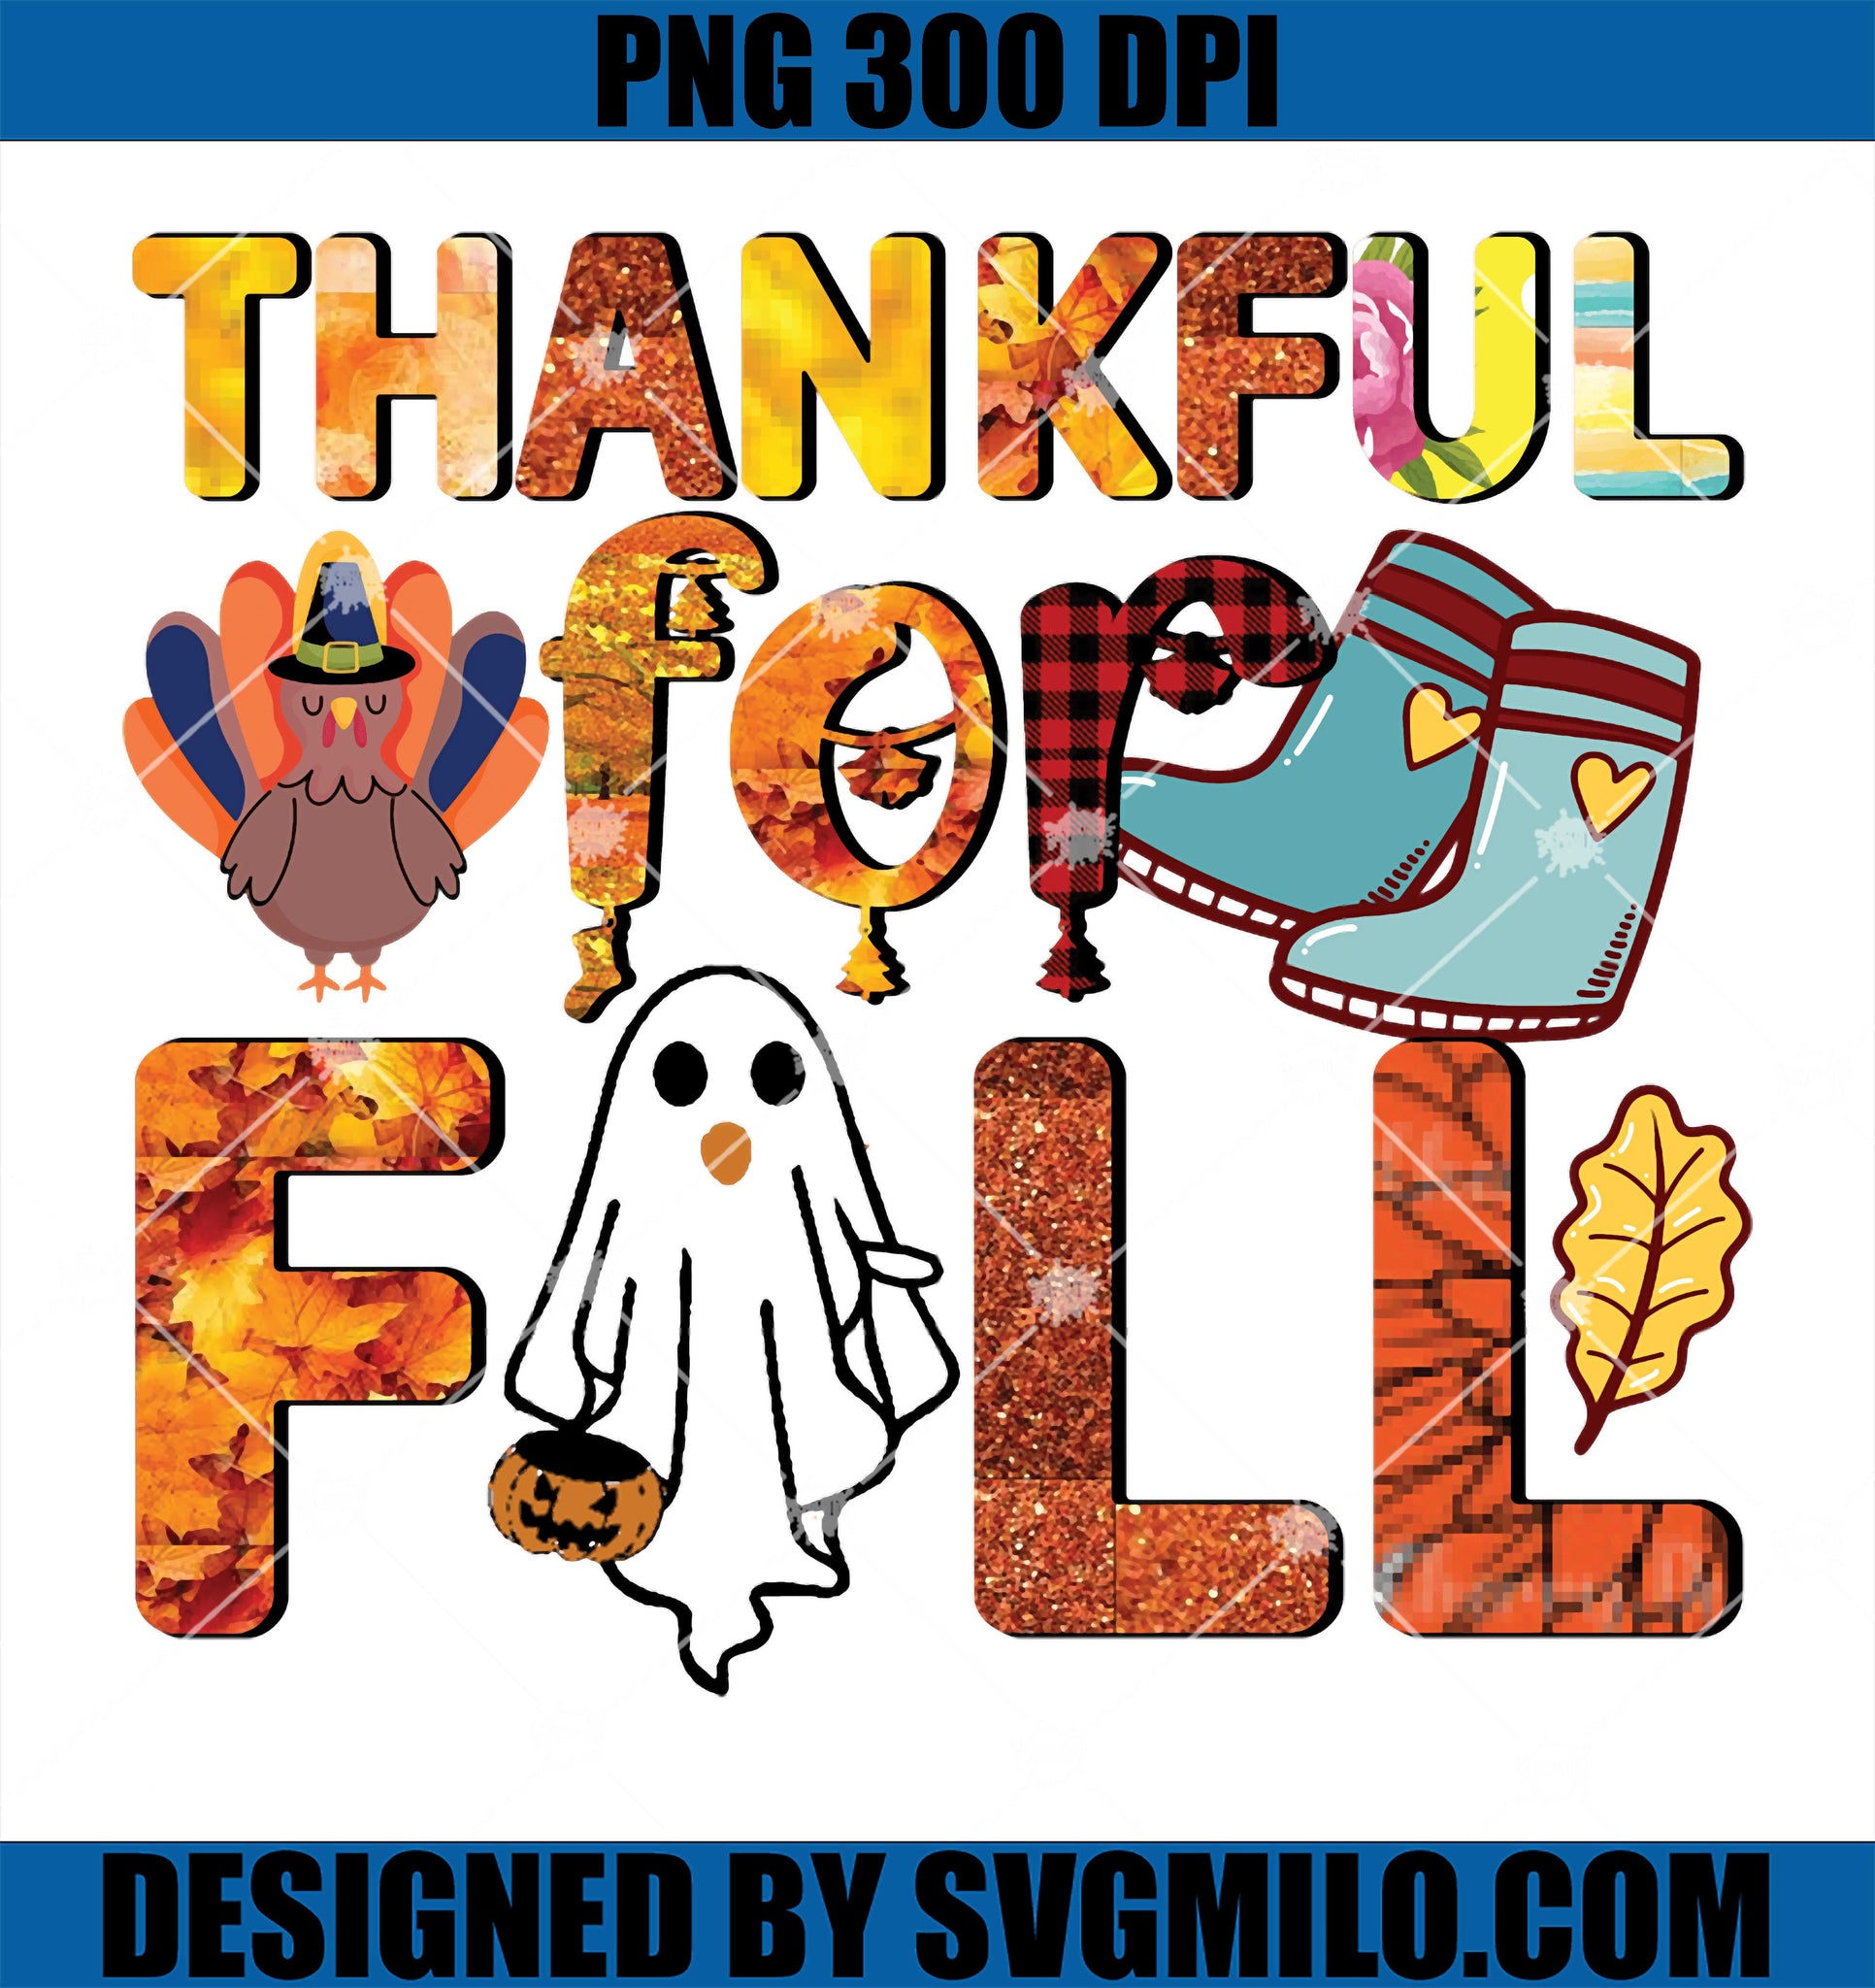 Thanksgiving For Fall PNG, Thankful Autumn Fall PNG, Hallothank PNG